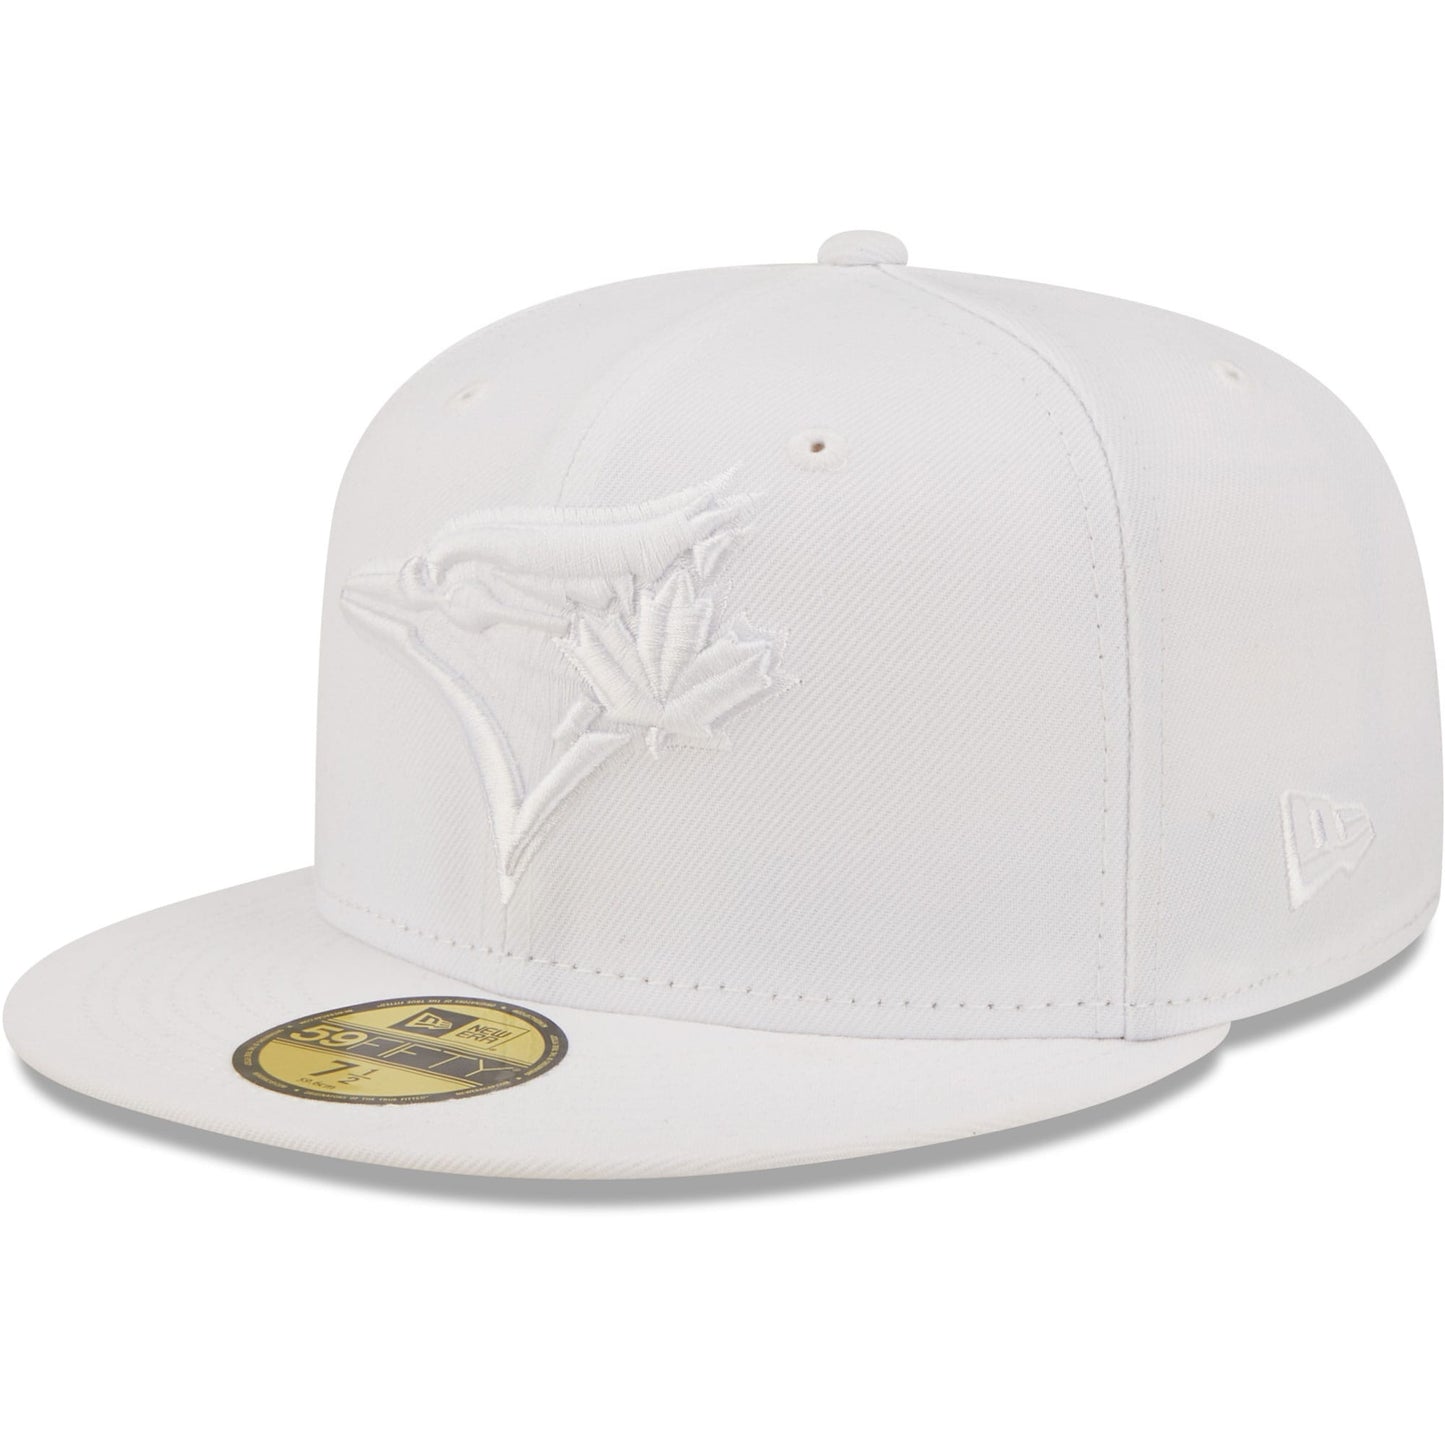 Toronto Blue Jays New Era White on White 59FIFTY Fitted Hat